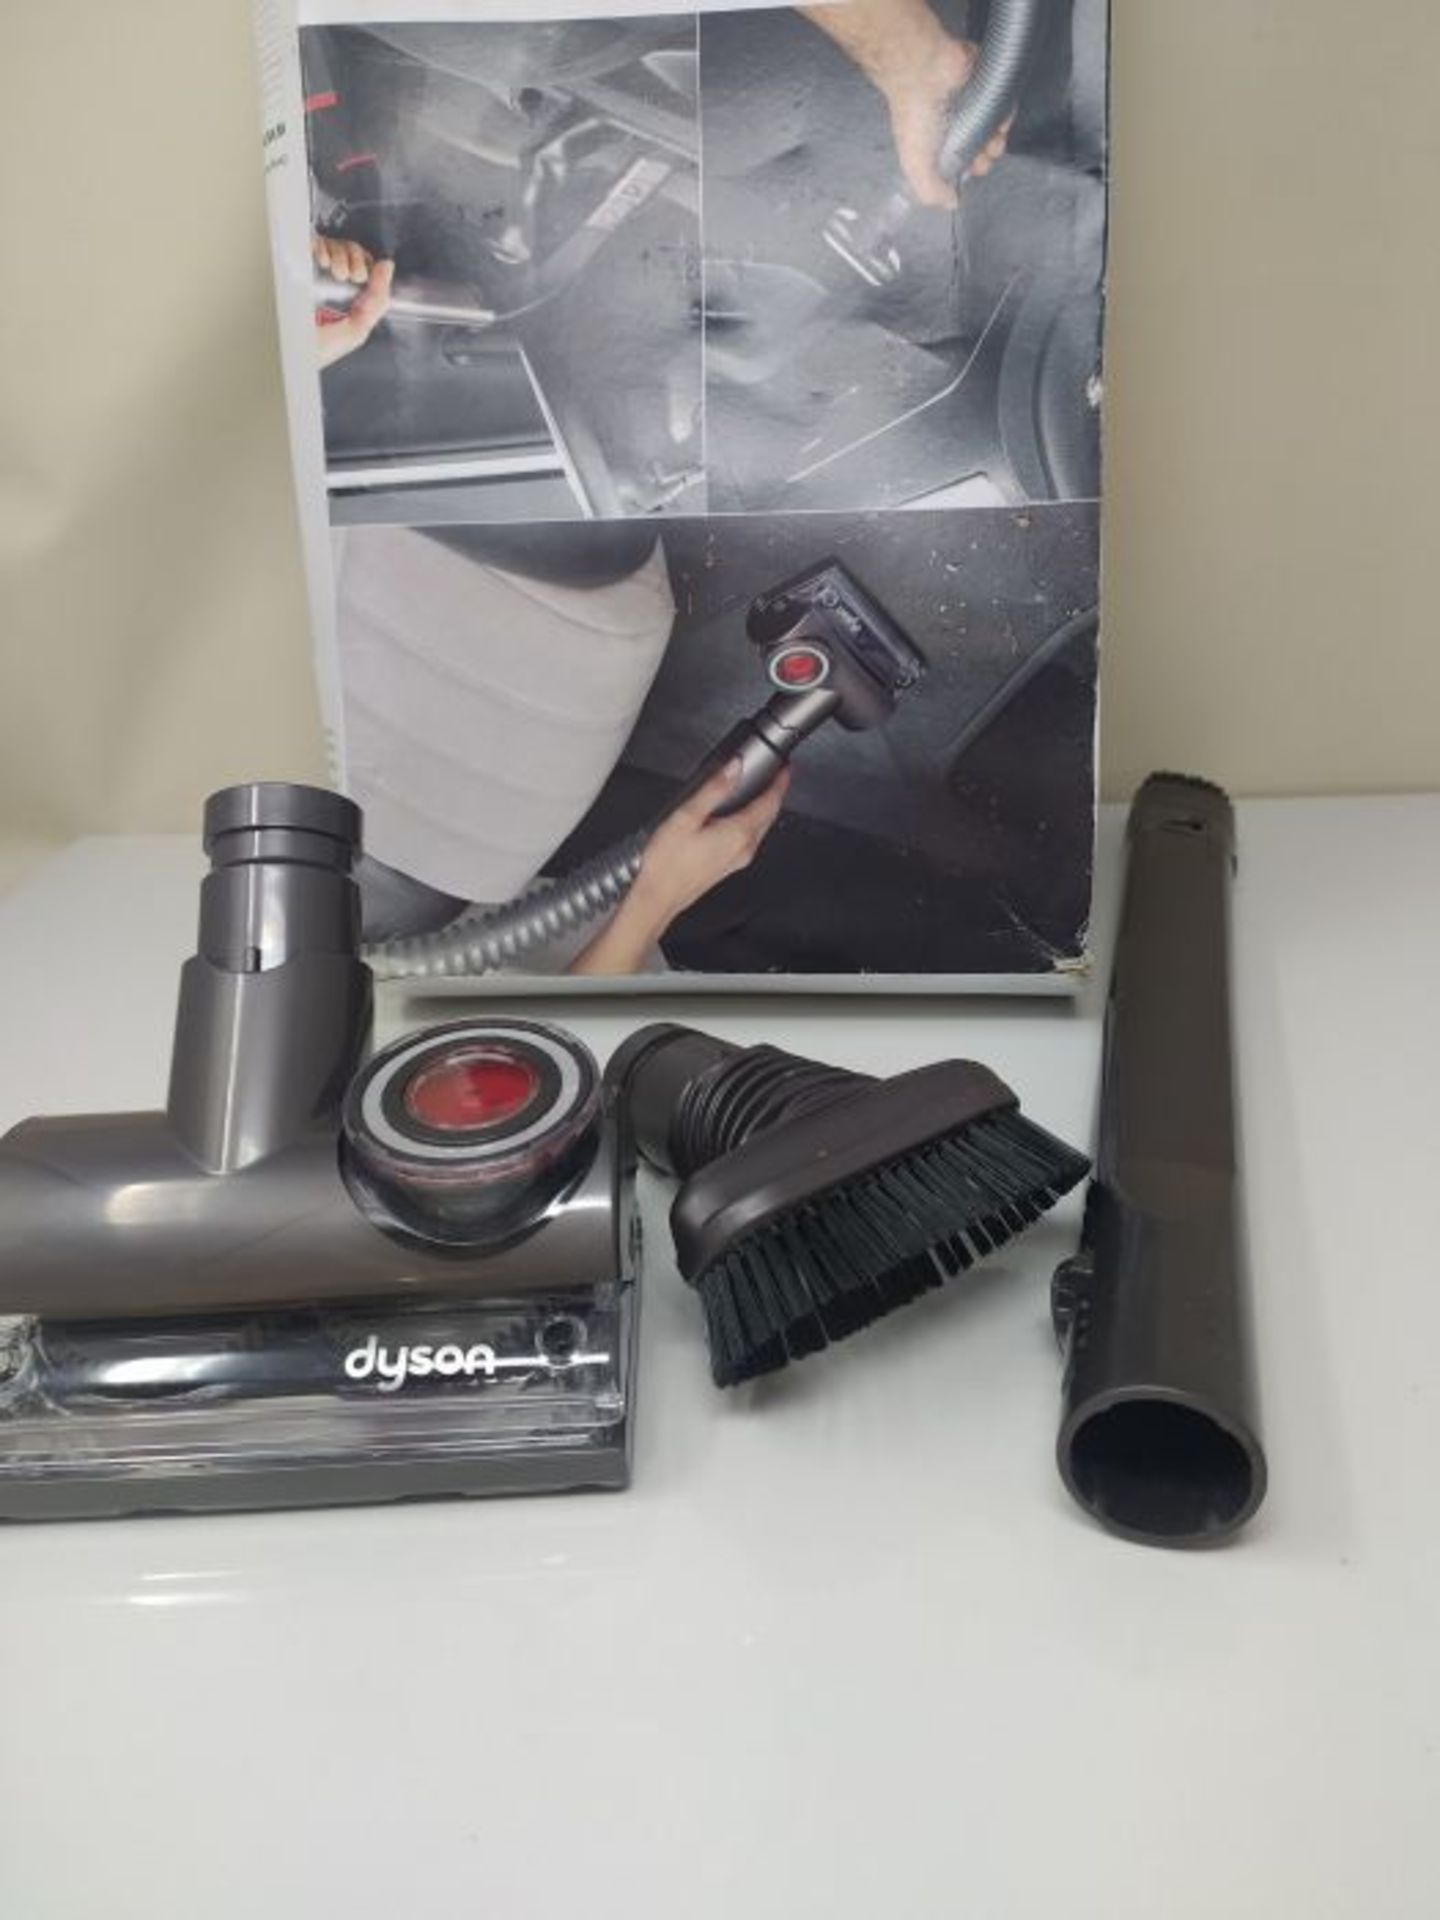 [INCOMPLETE] Dyson Car cleaning kit - Image 2 of 2